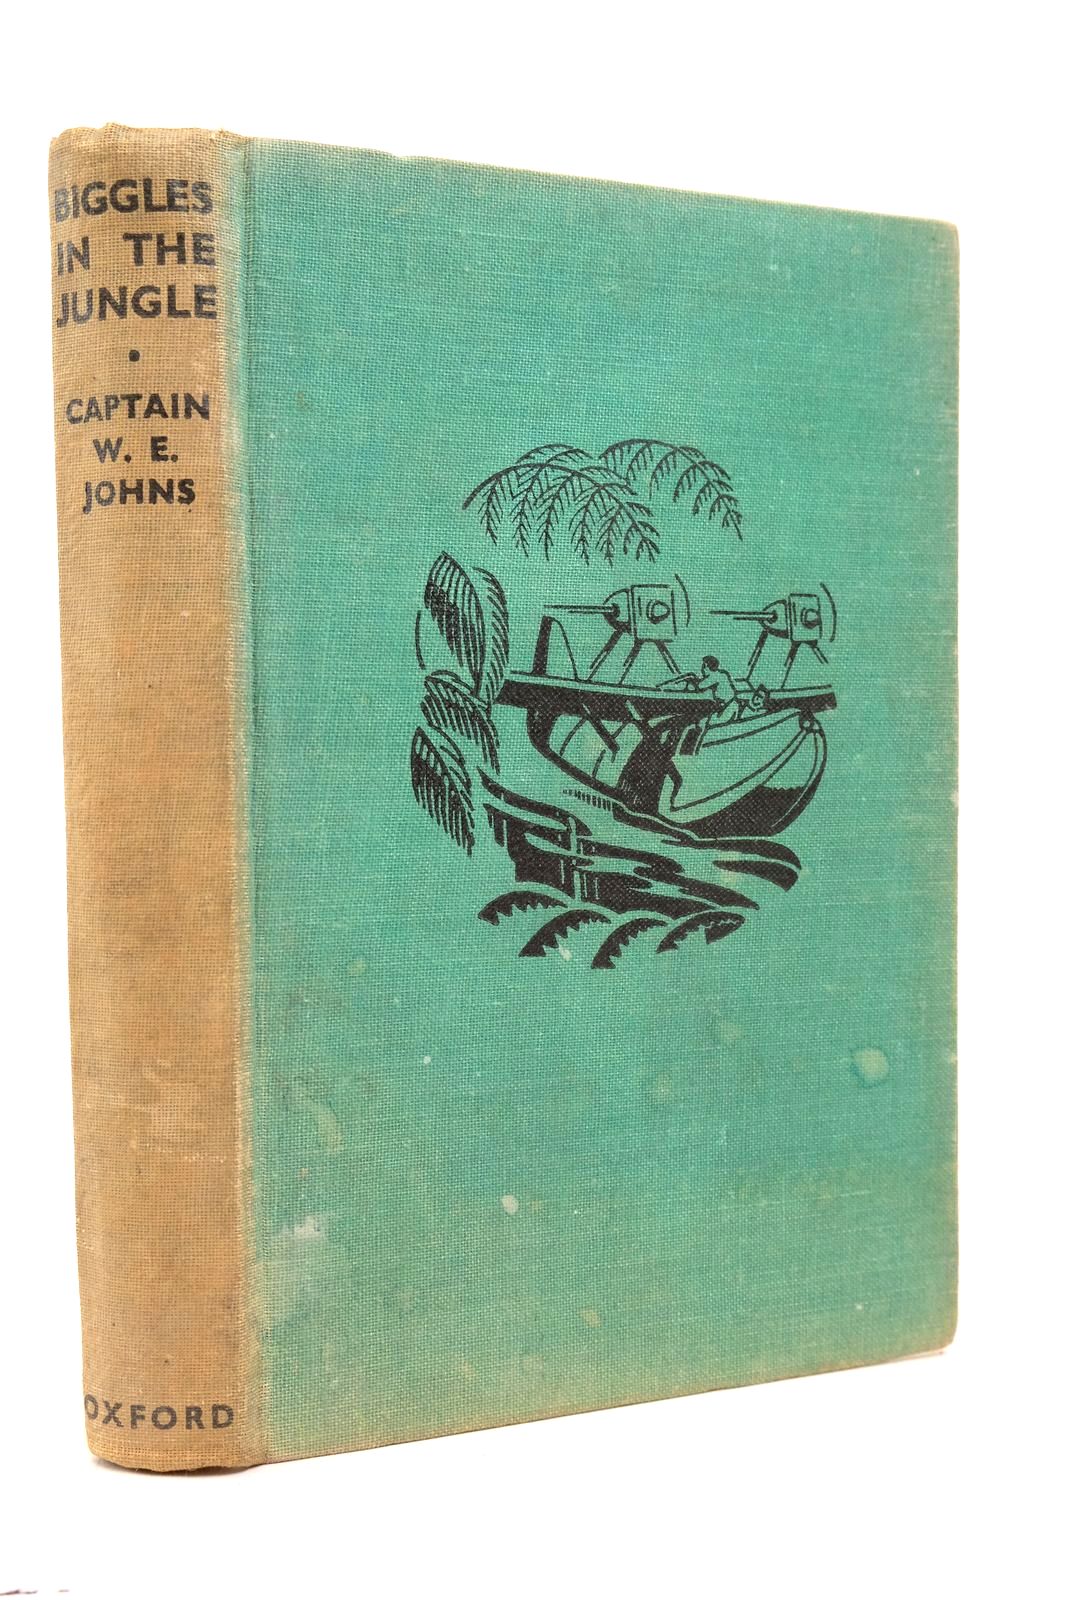 Photo of BIGGLES IN THE JUNGLE written by Johns, W.E. illustrated by Cuneo, Terence published by Oxford University Press, Humphrey Milford (STOCK CODE: 2139792)  for sale by Stella & Rose's Books